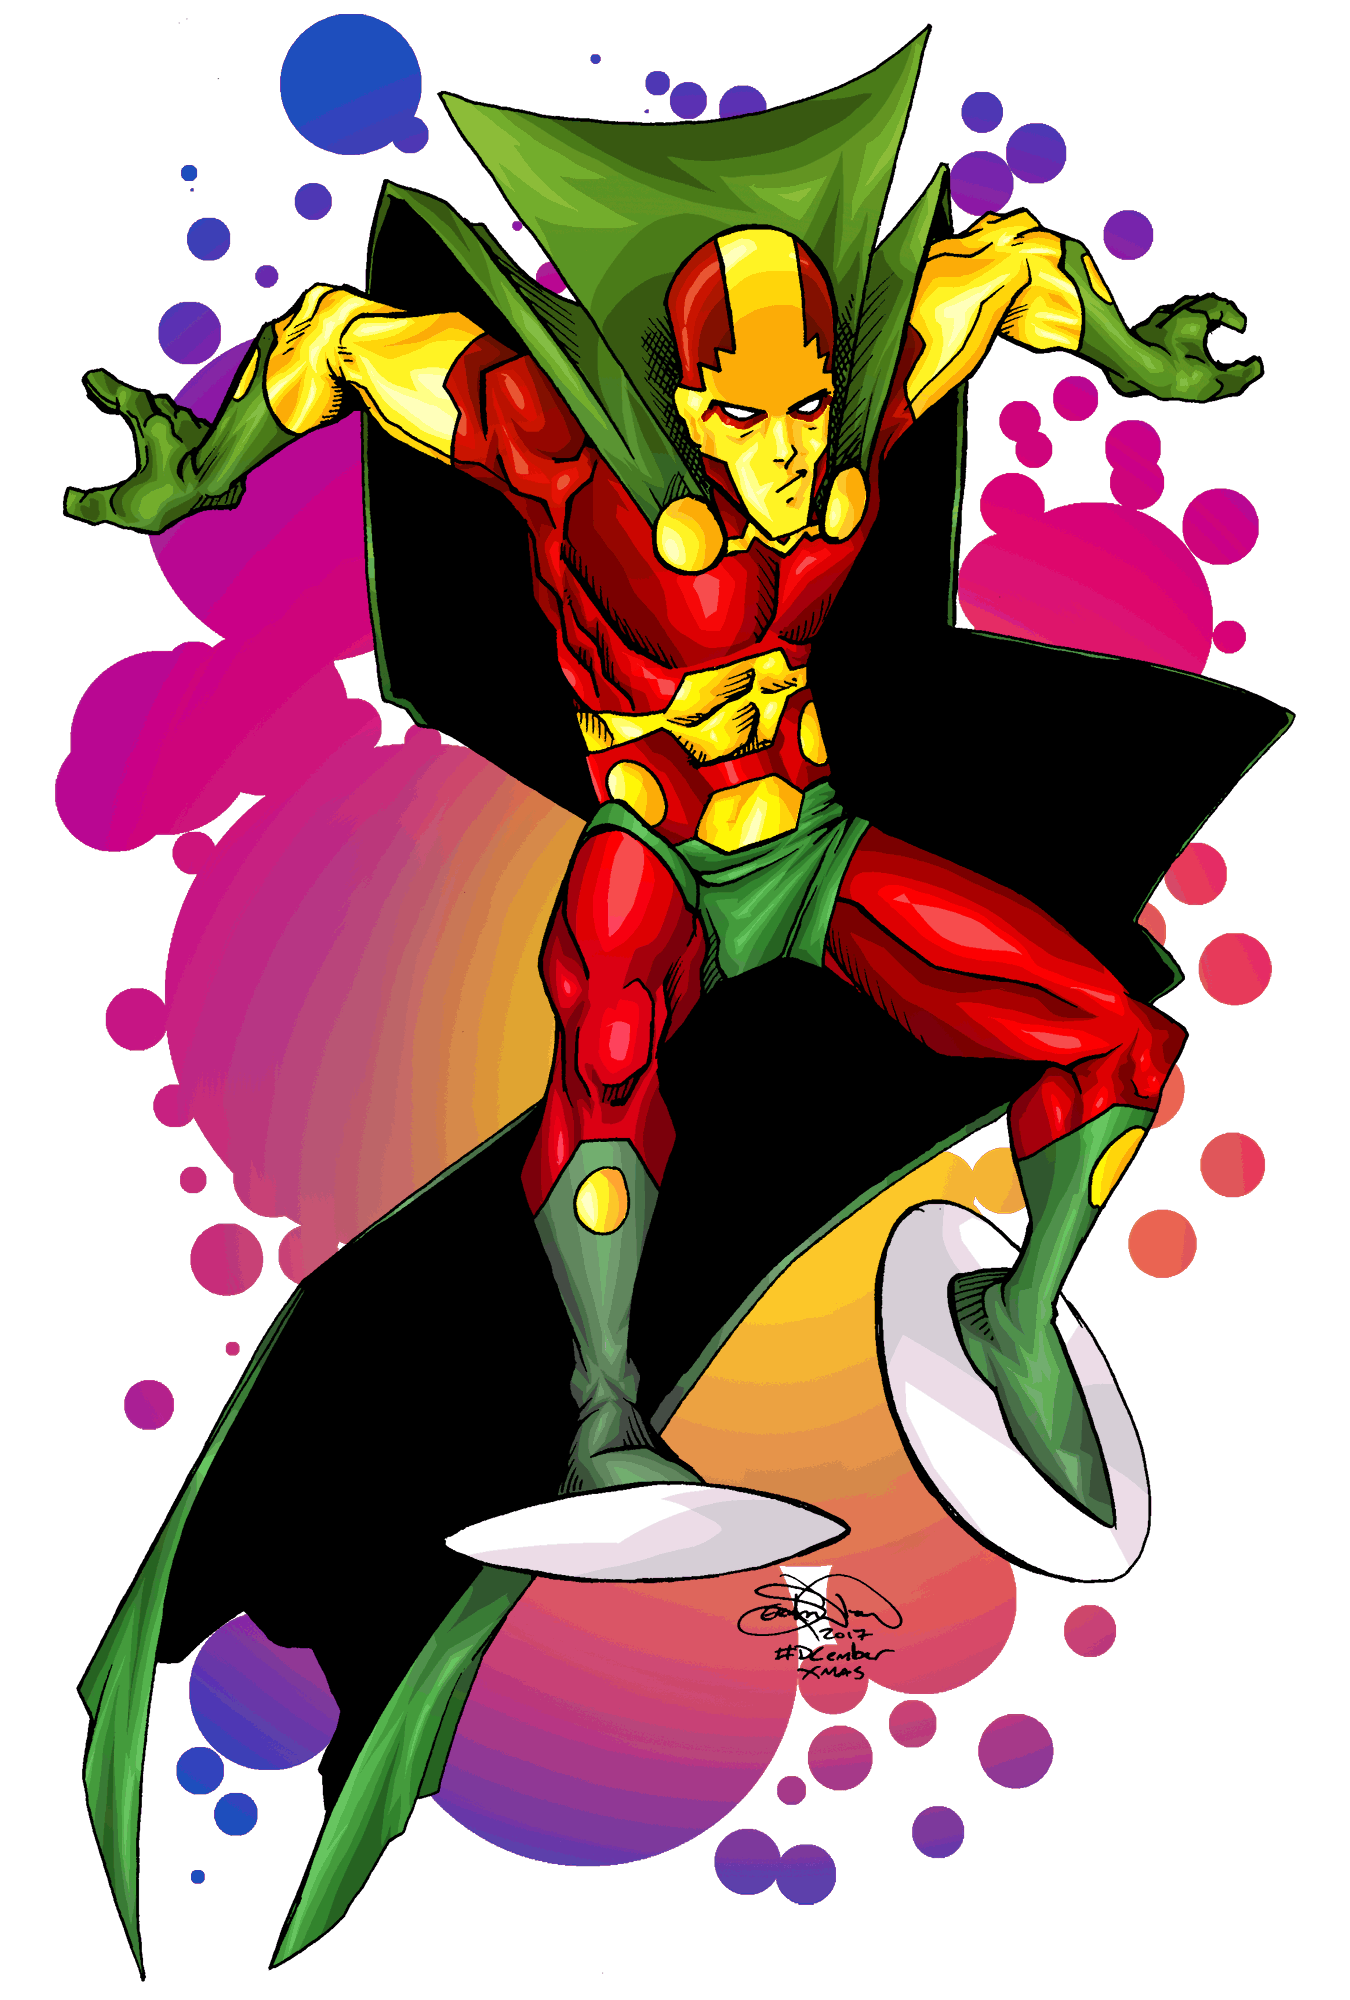 1059. Mister Miracle